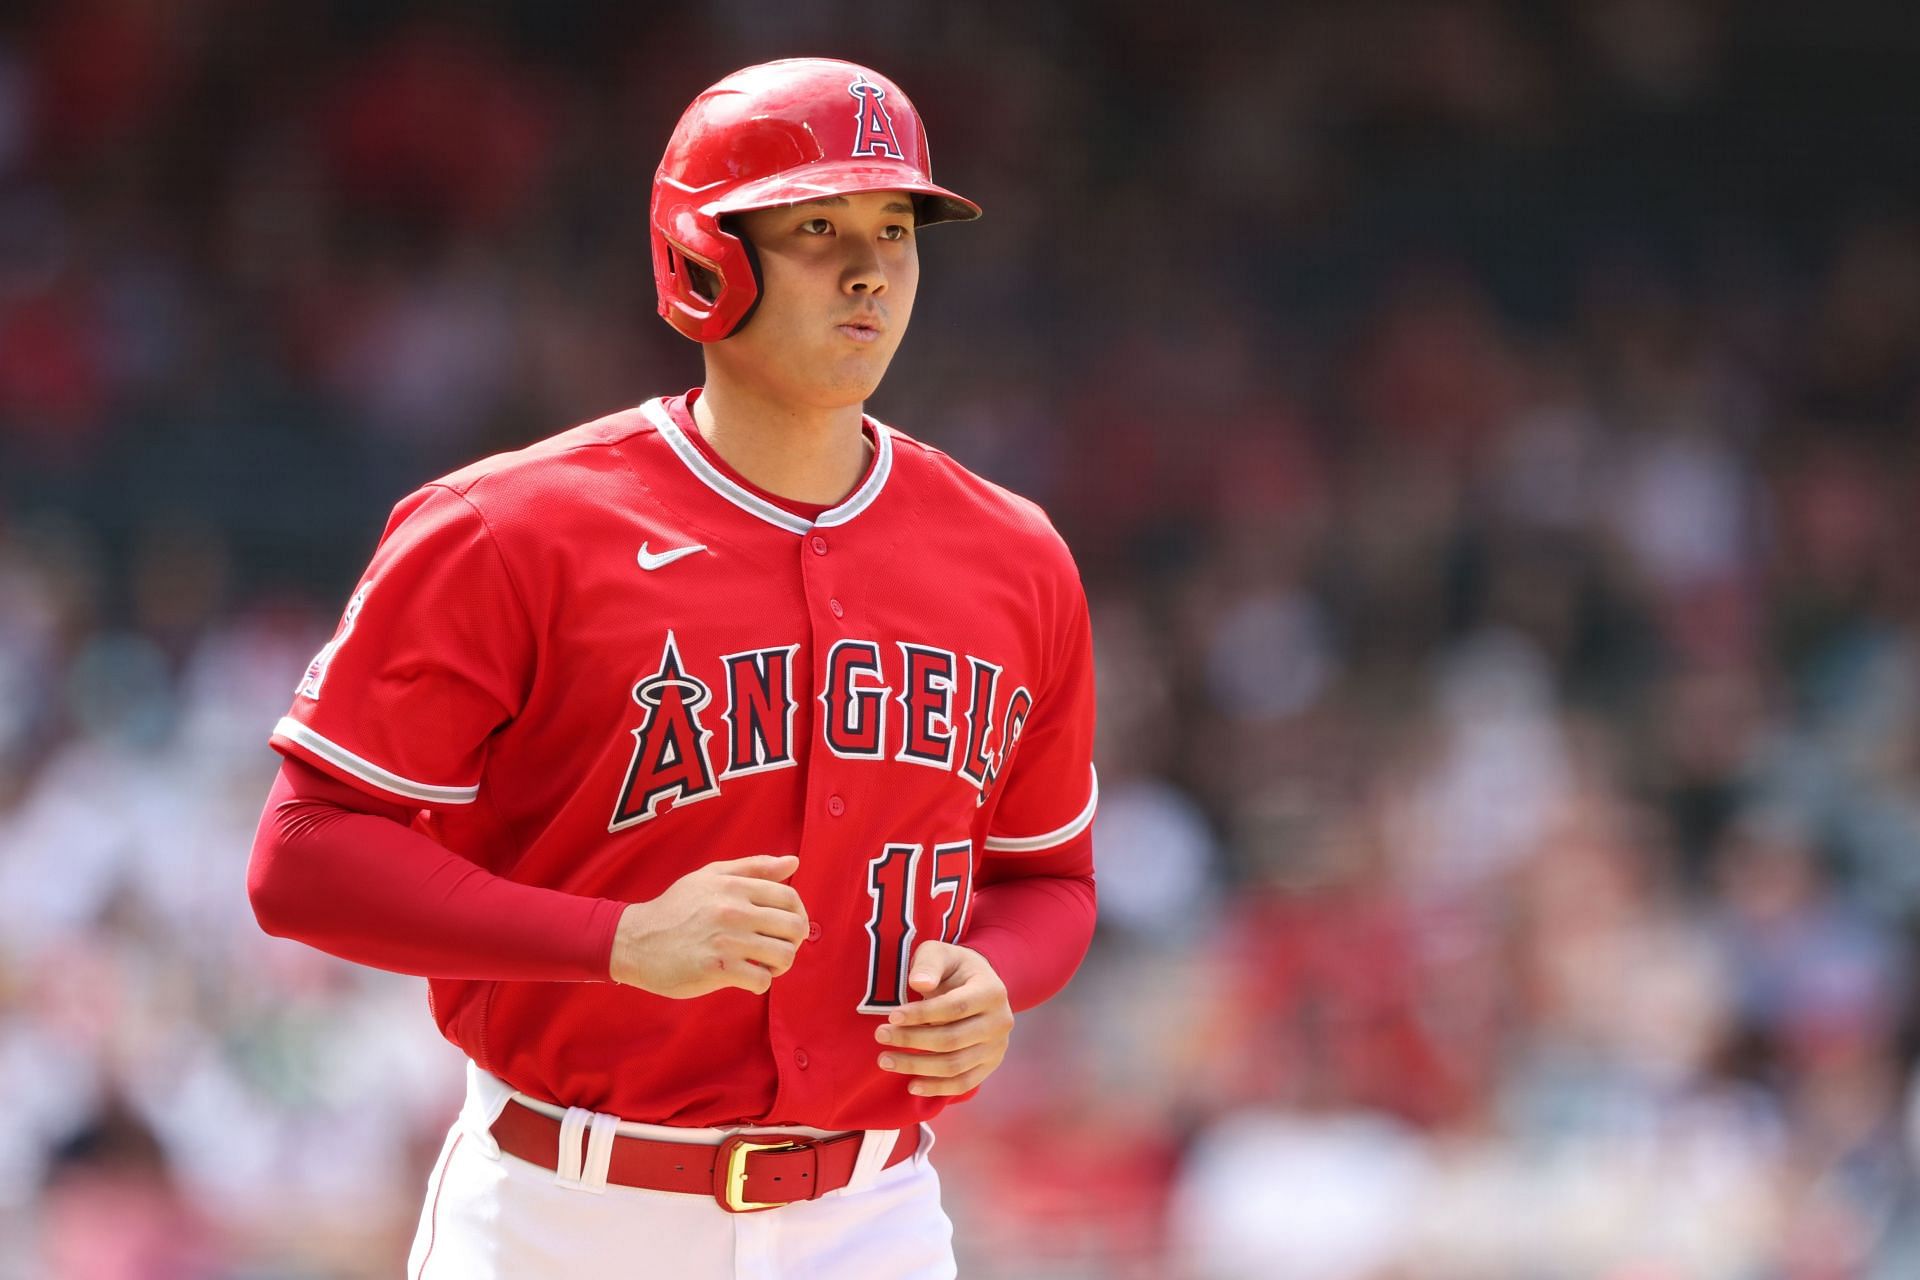 MVP Candidate Shohei Ohtani of the Angels